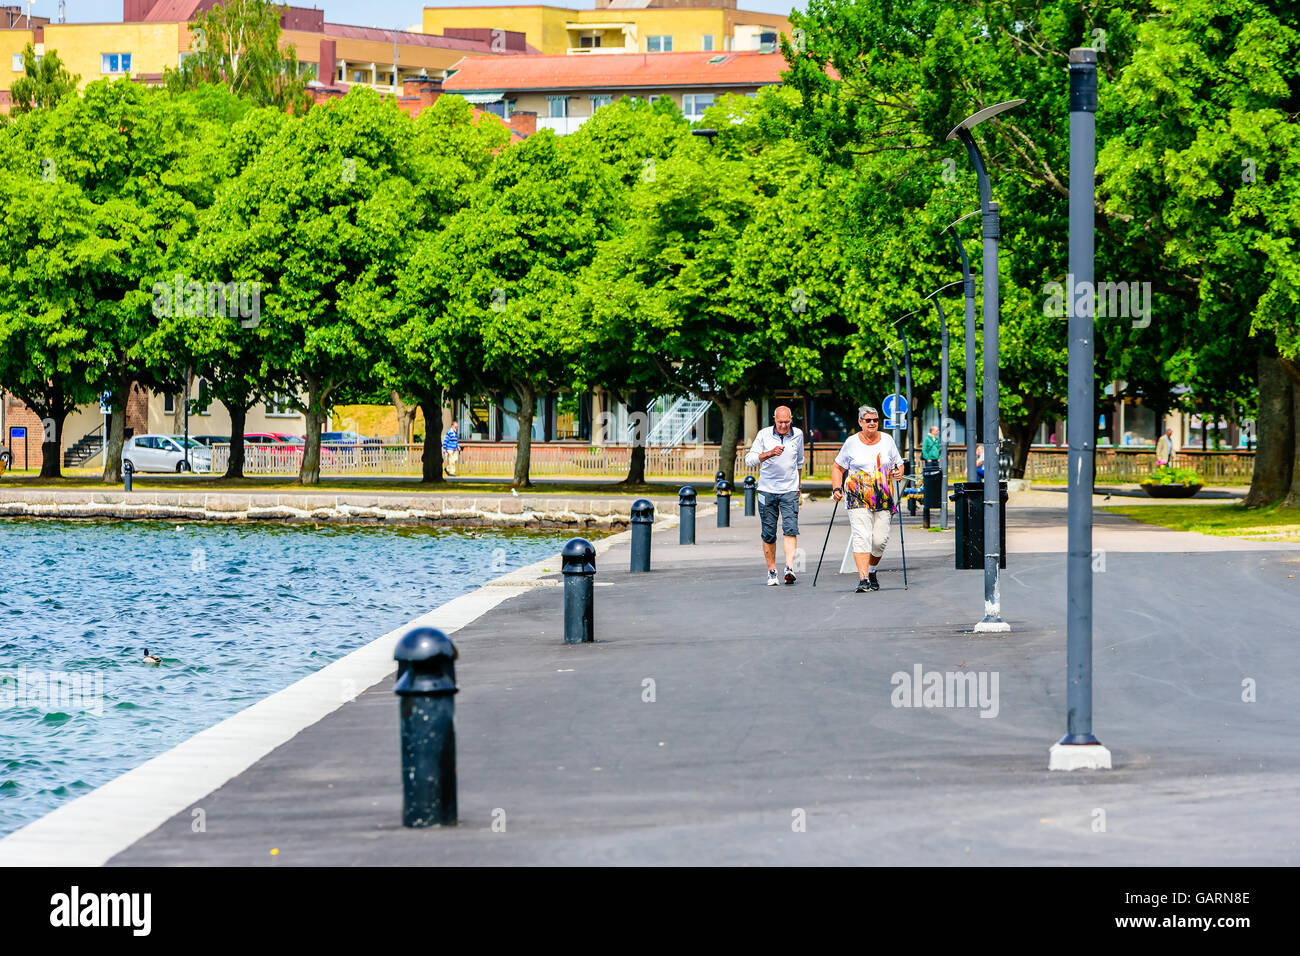 Motala, Sweden - June 21, 2016: Senior persons out for some exercise by the waterside promenade. Trees and the city behind them. Stock Photo